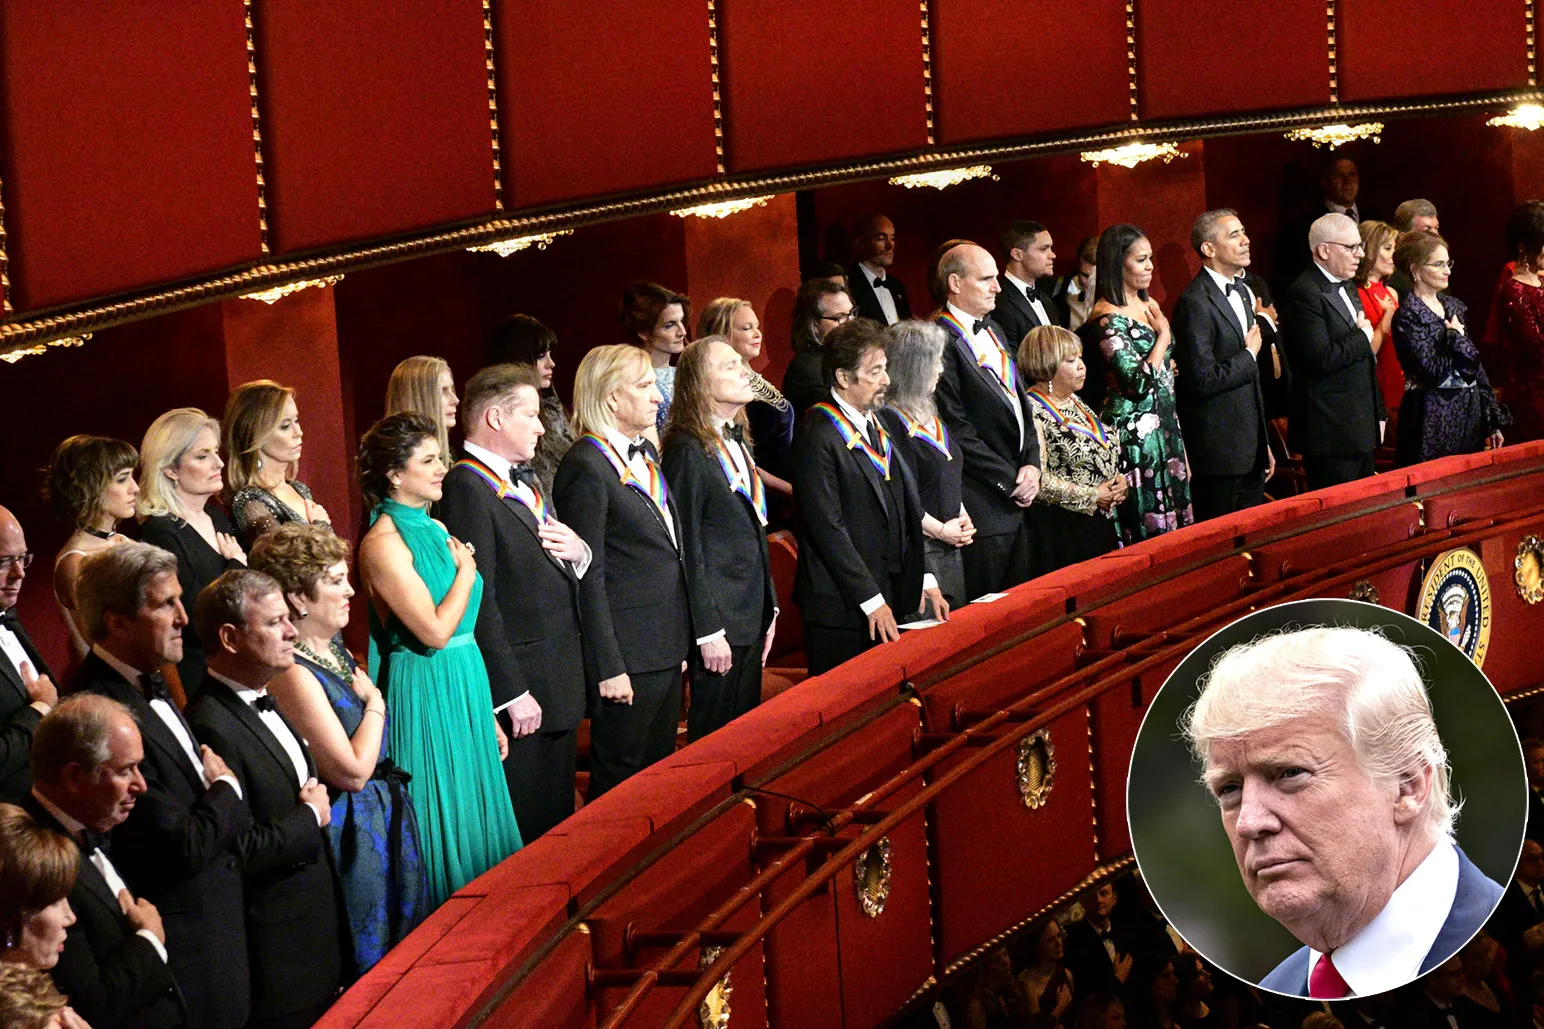 Left, Several attendees including Former First Lady Michelle Obama and President Barack Obama, honorees the Eagles, Mavis Staples, James Taylor, Al Pacino and Argentine pianist Martha Argerich seen at the 39th Kennedy Center Honors; Right, Donald Trump on the South Lawn on August 14th.